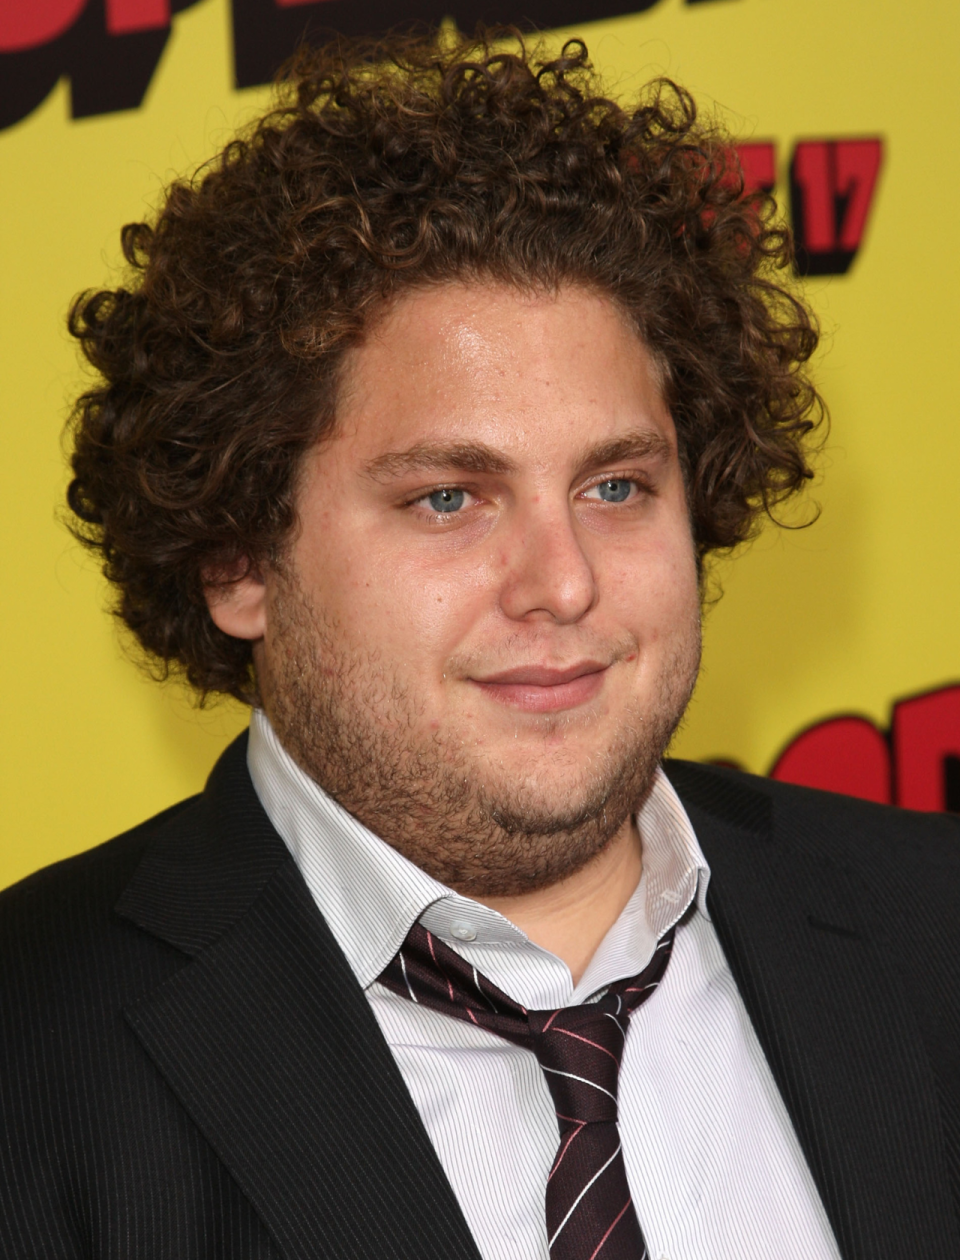 Jonah Hill attends the premiere of Superbad in Los Angeles